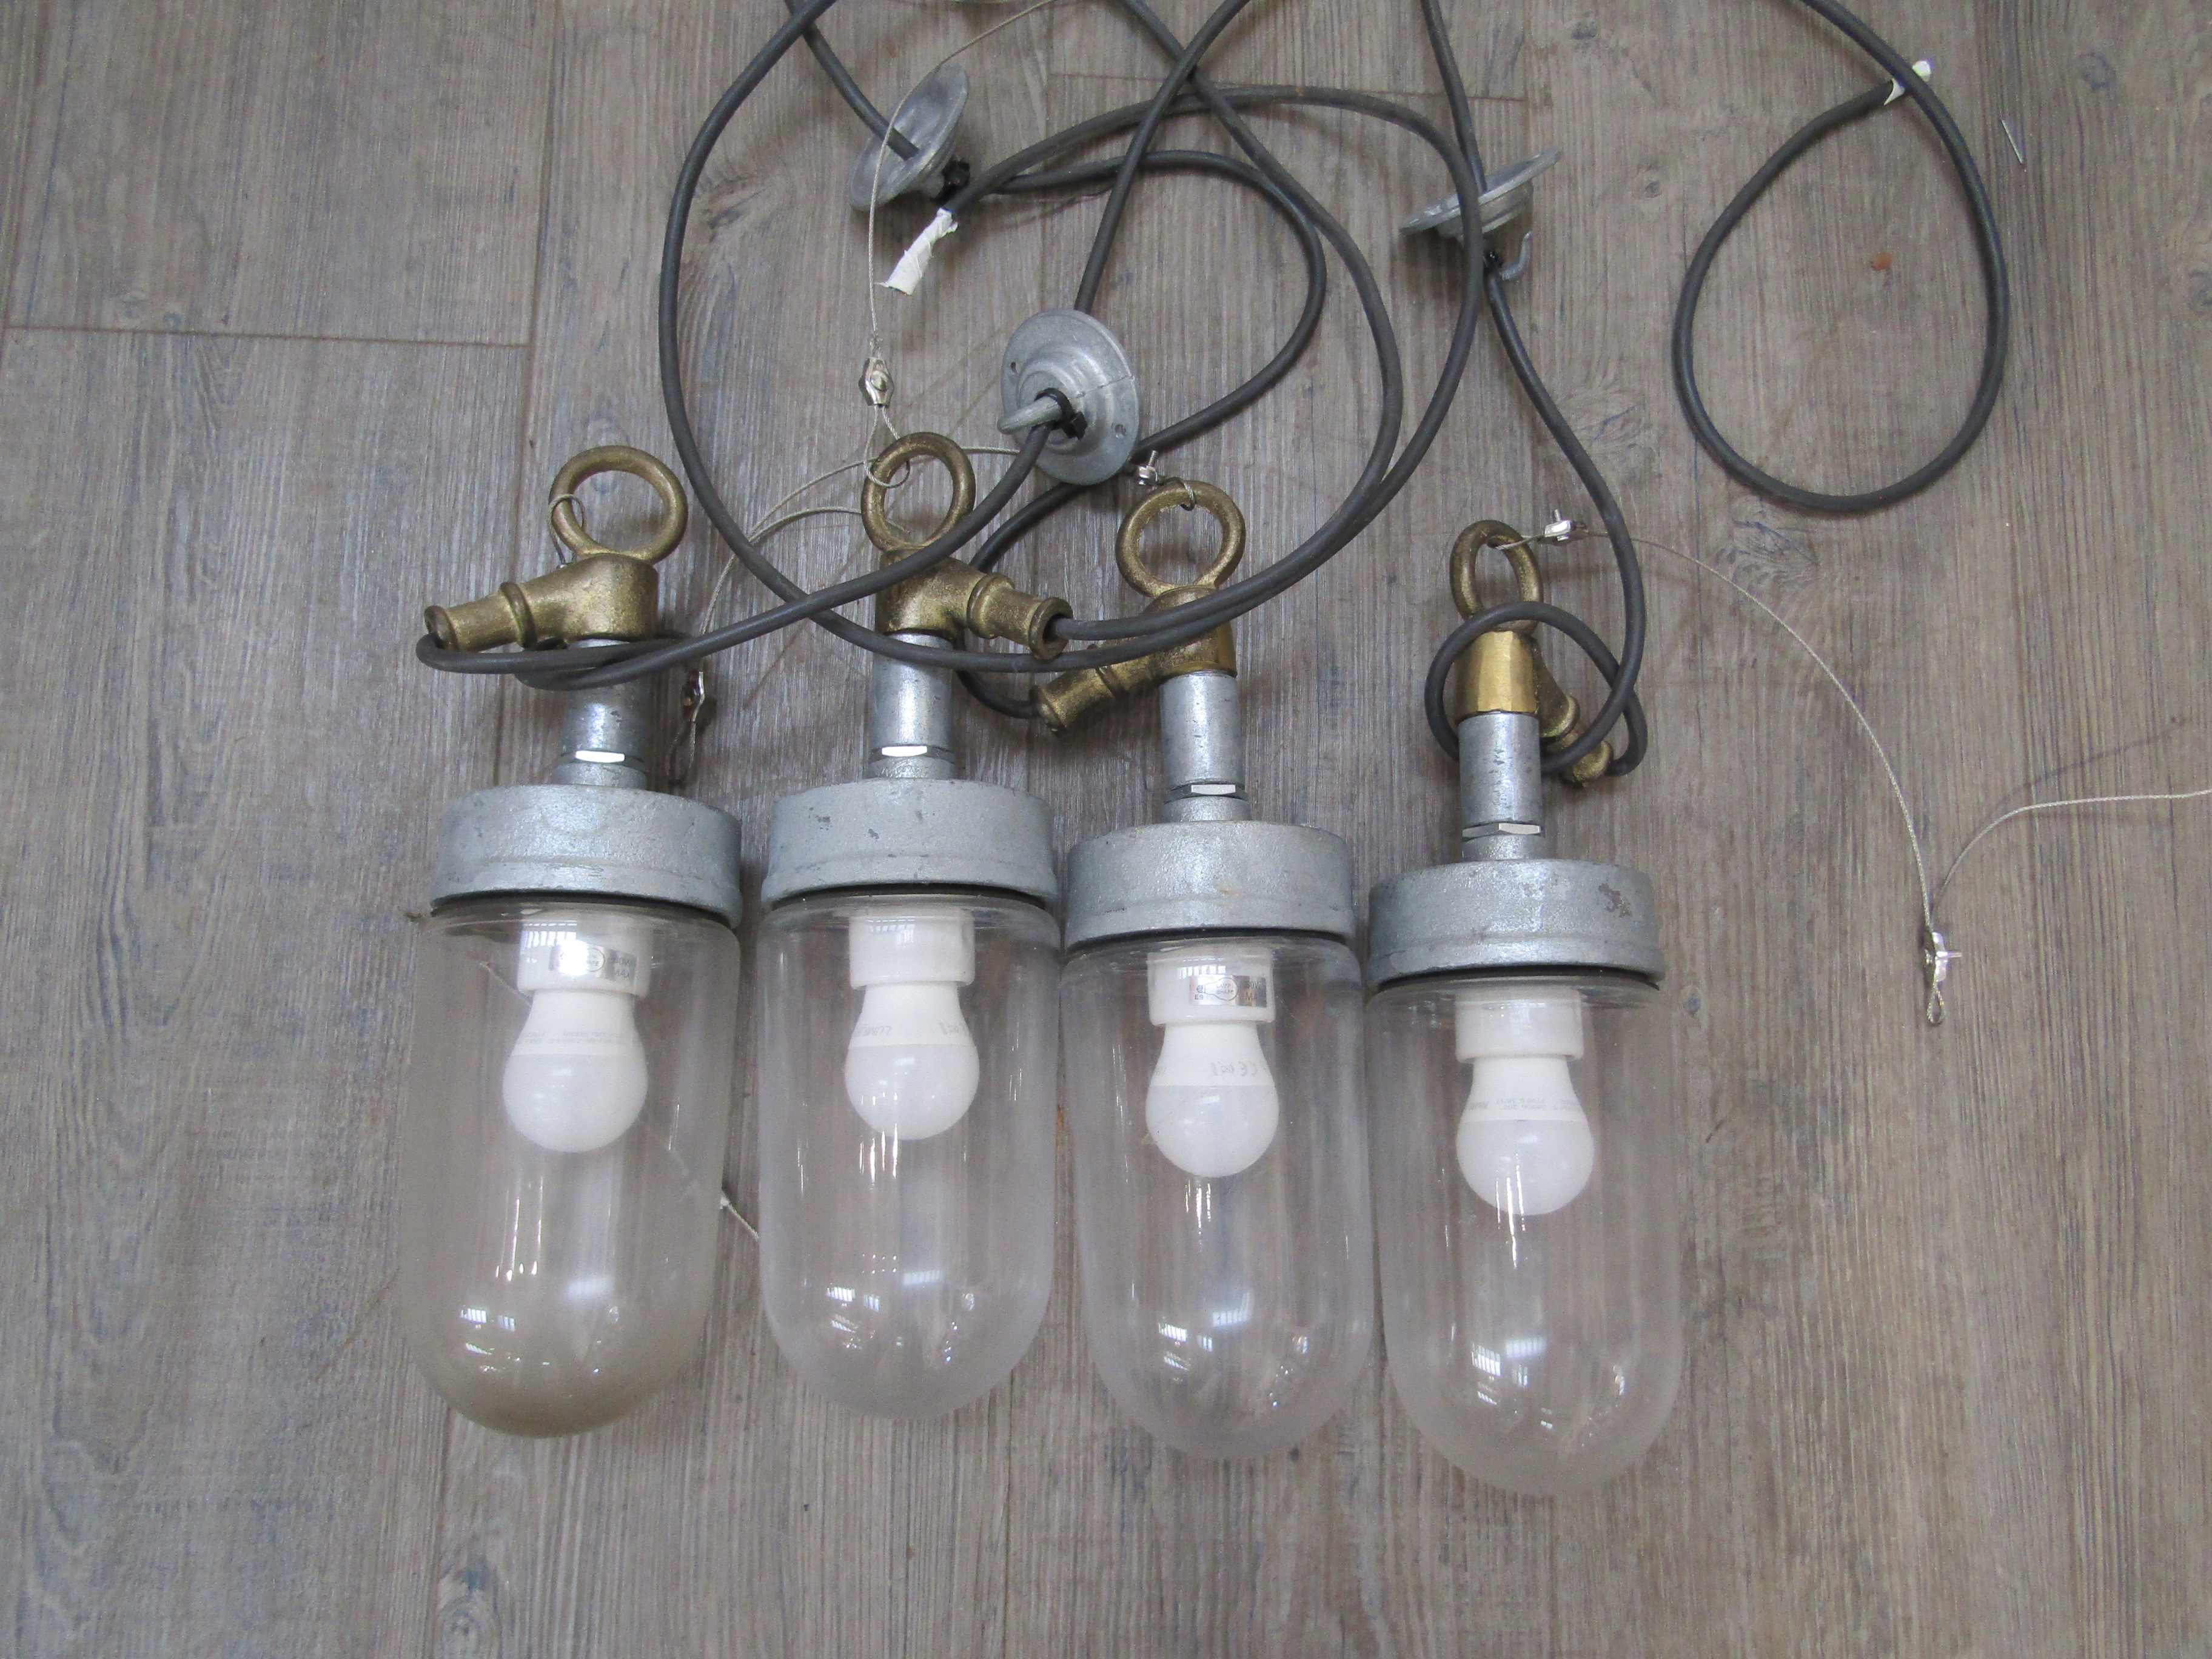 Four industrial exterior style ceiling pendants in painted grey metal and heavy duty glass